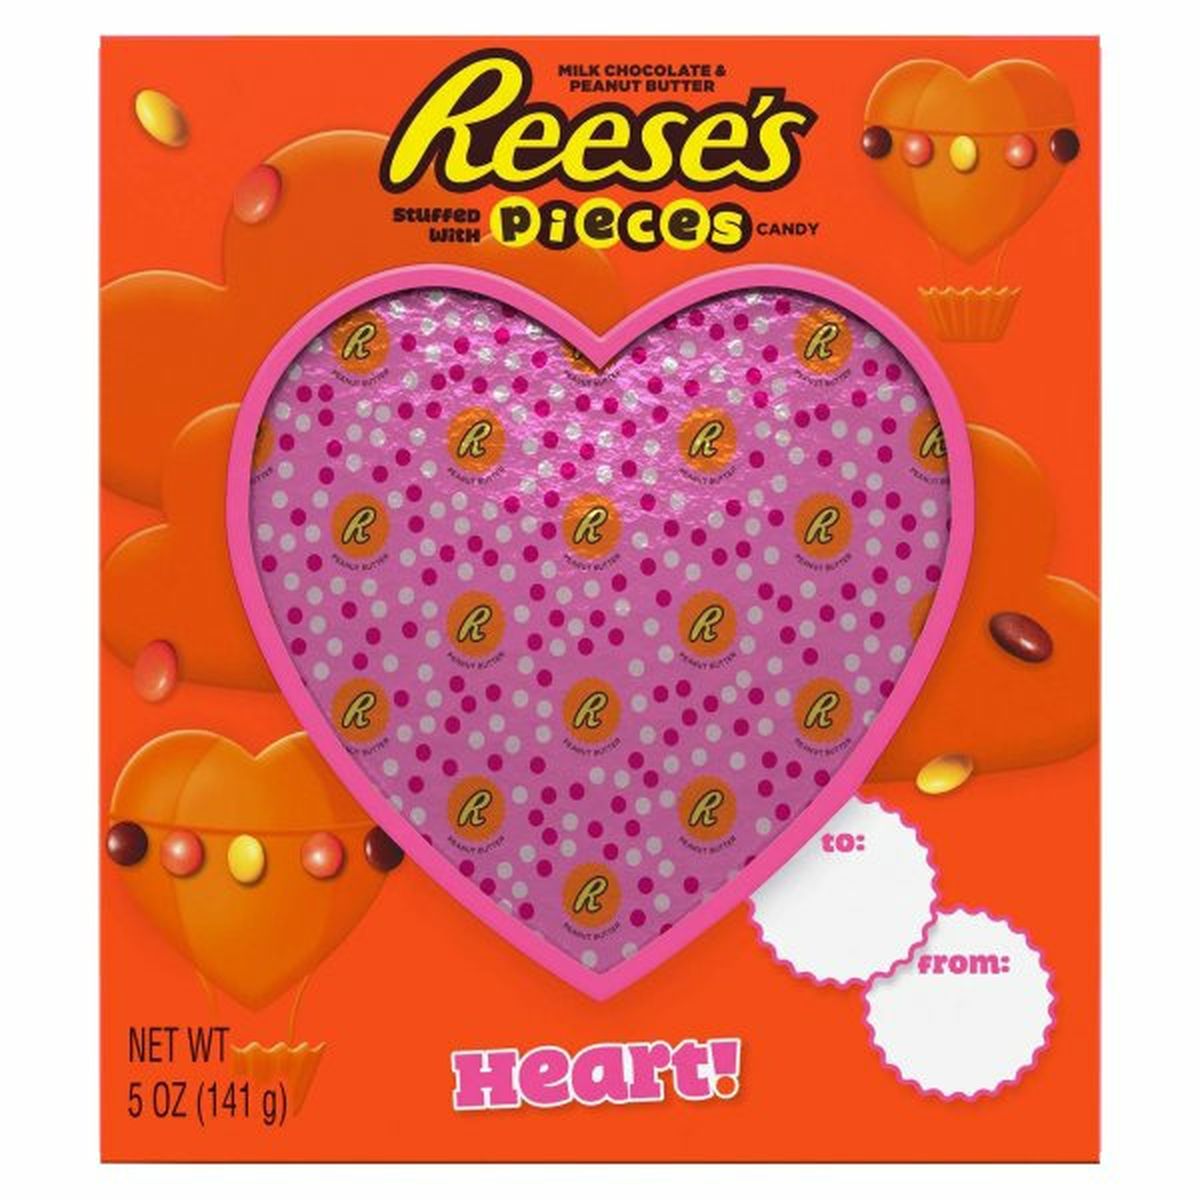 Calories in Reese's Pieces Milk Chocolate & Peanut Butter, Heart